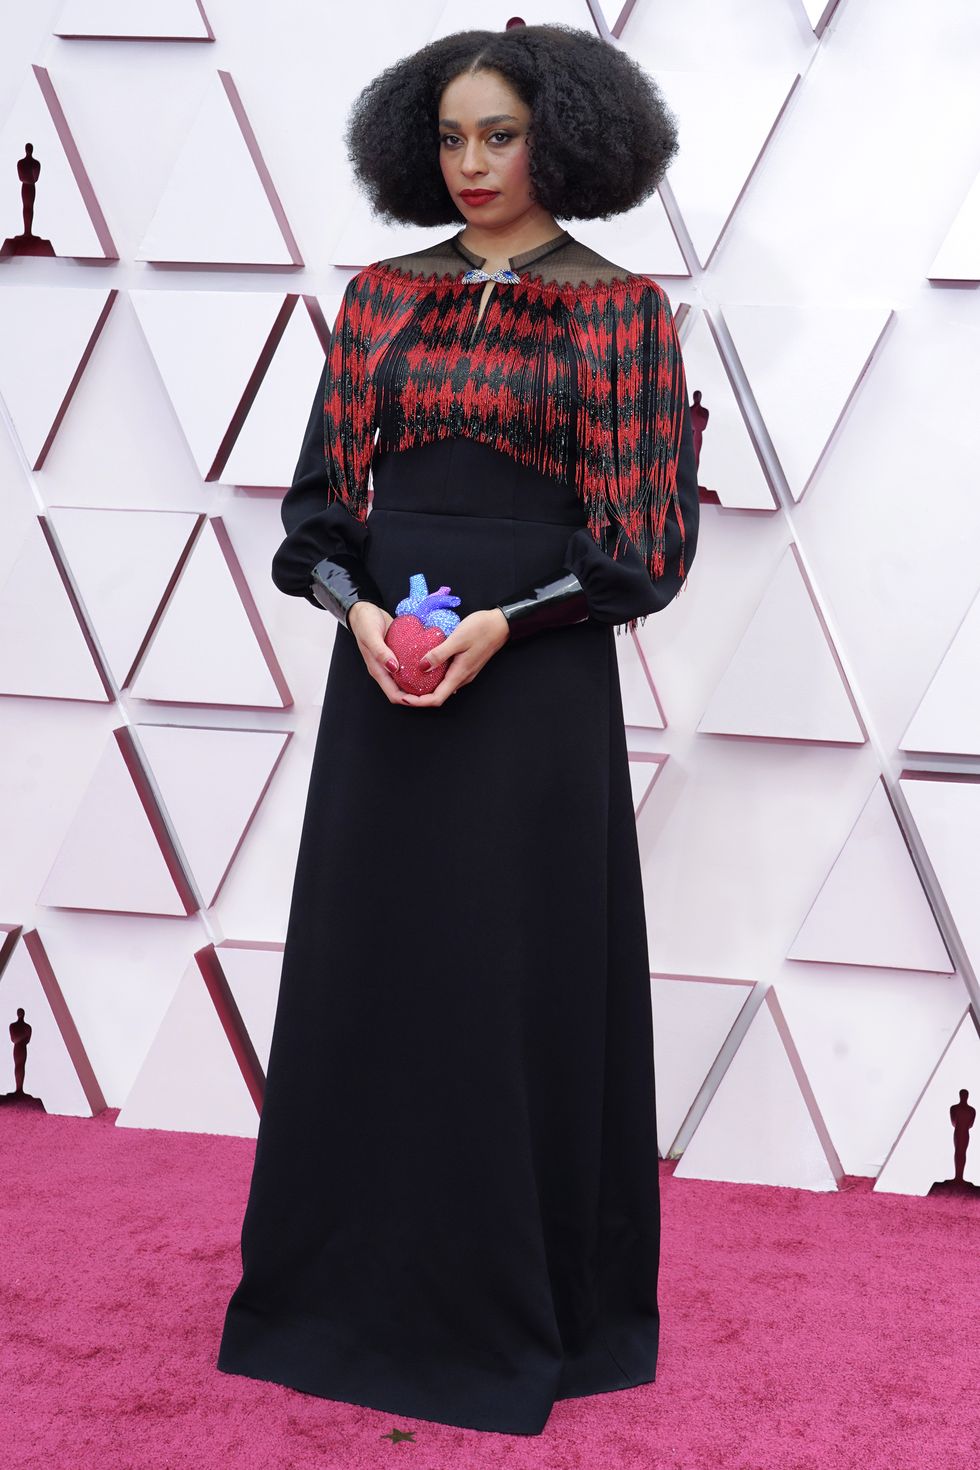 Photos from Best Dressed Stars at the 2021 Oscars